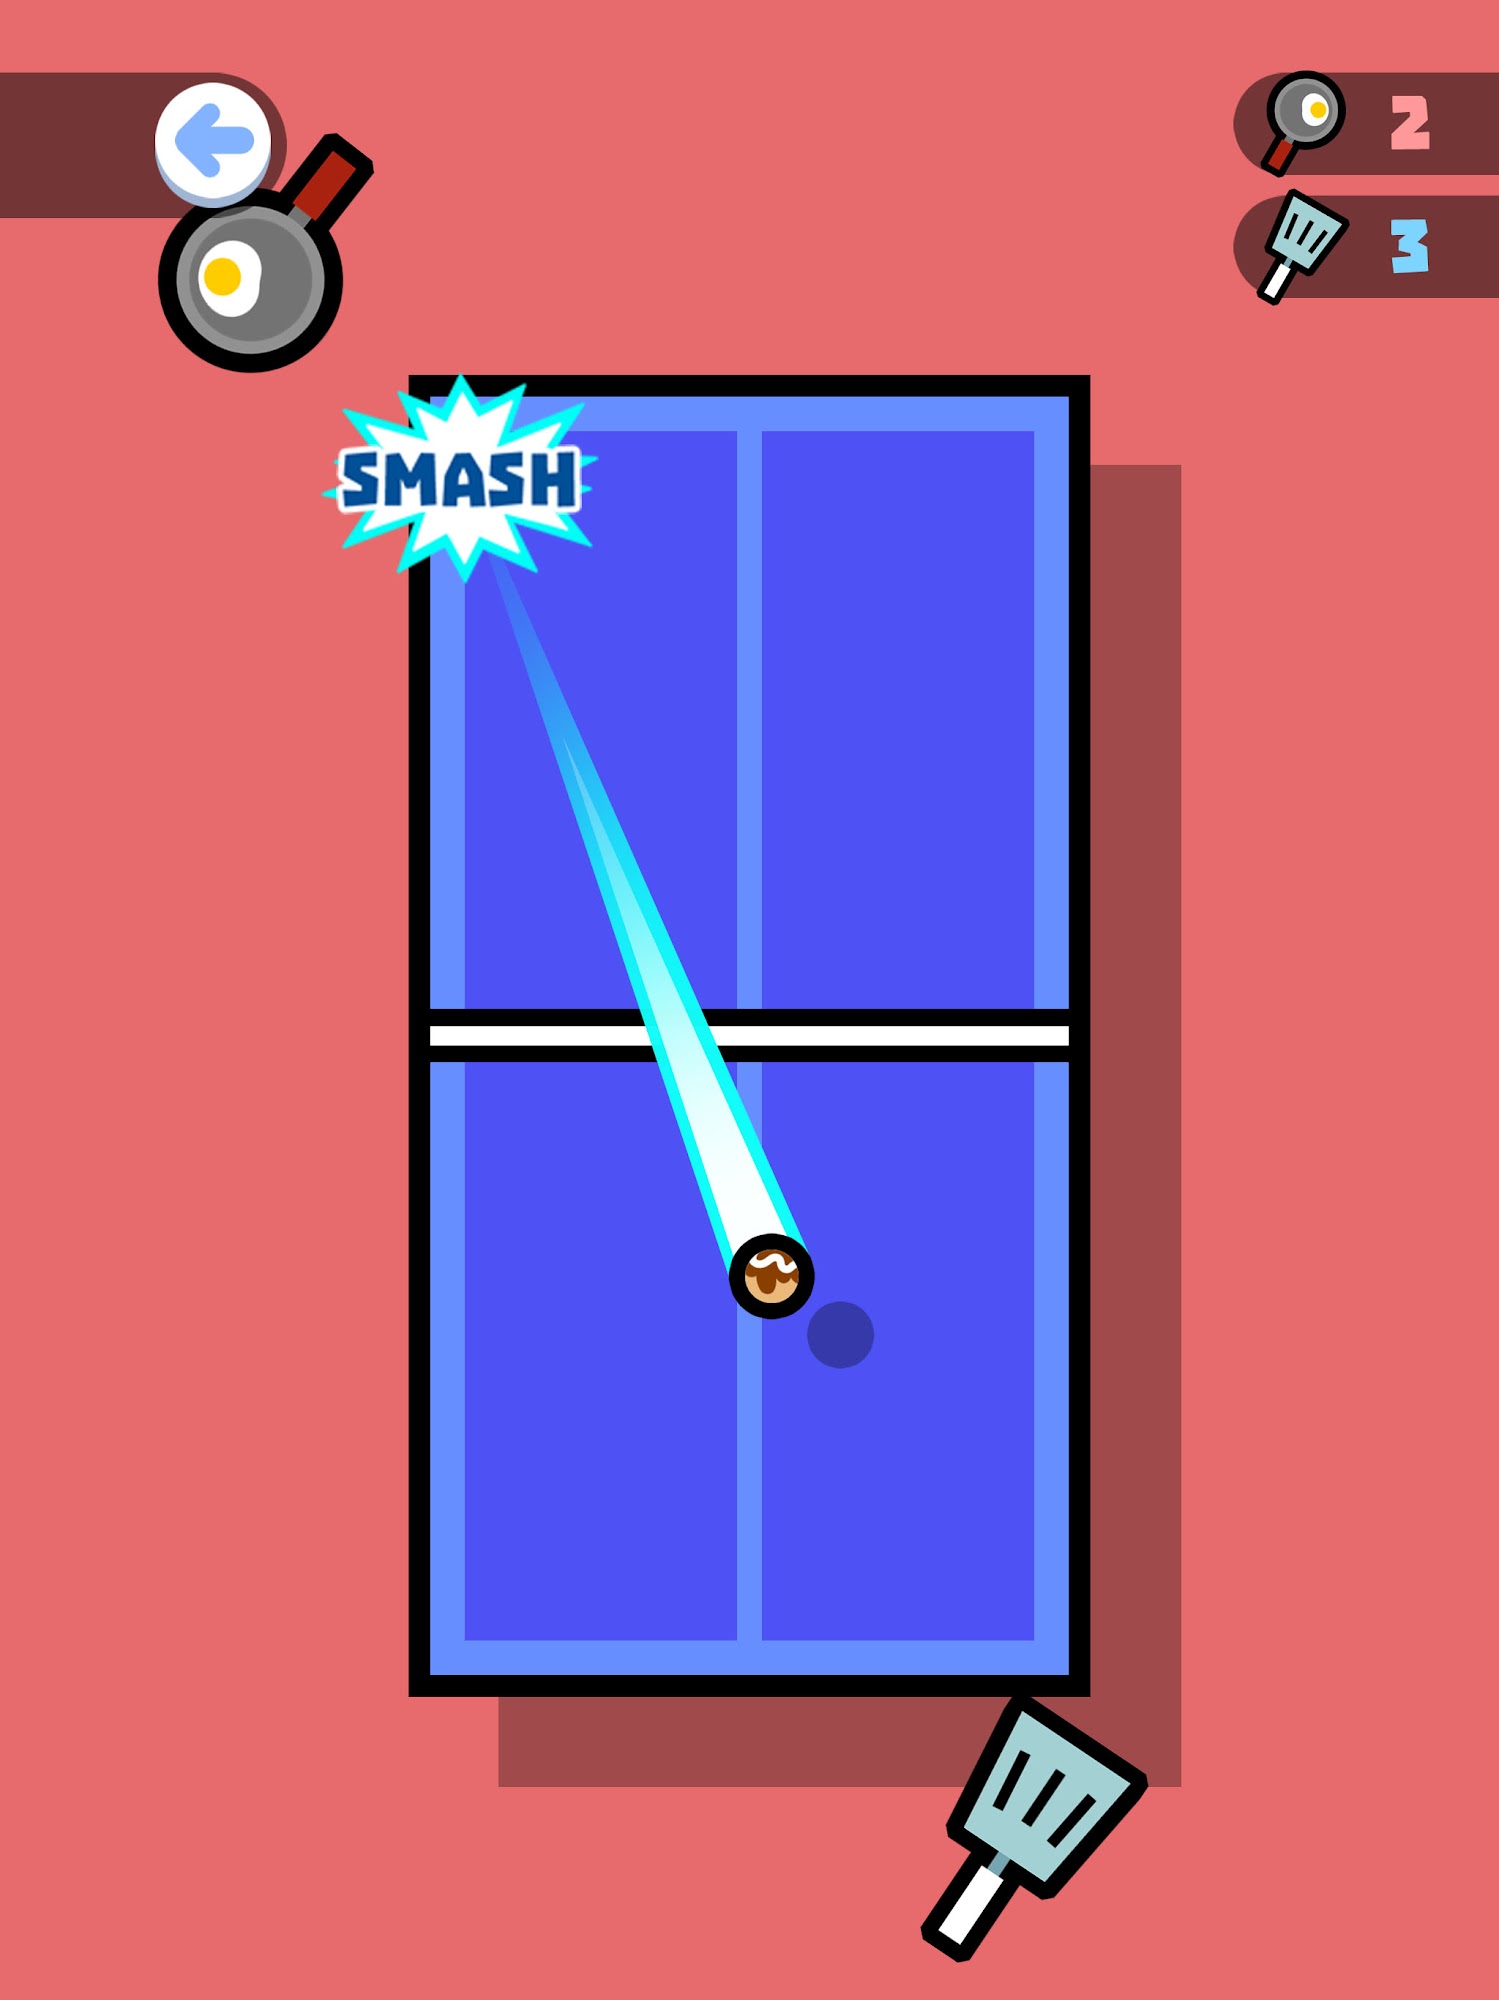 Battle Table Tennis for Android